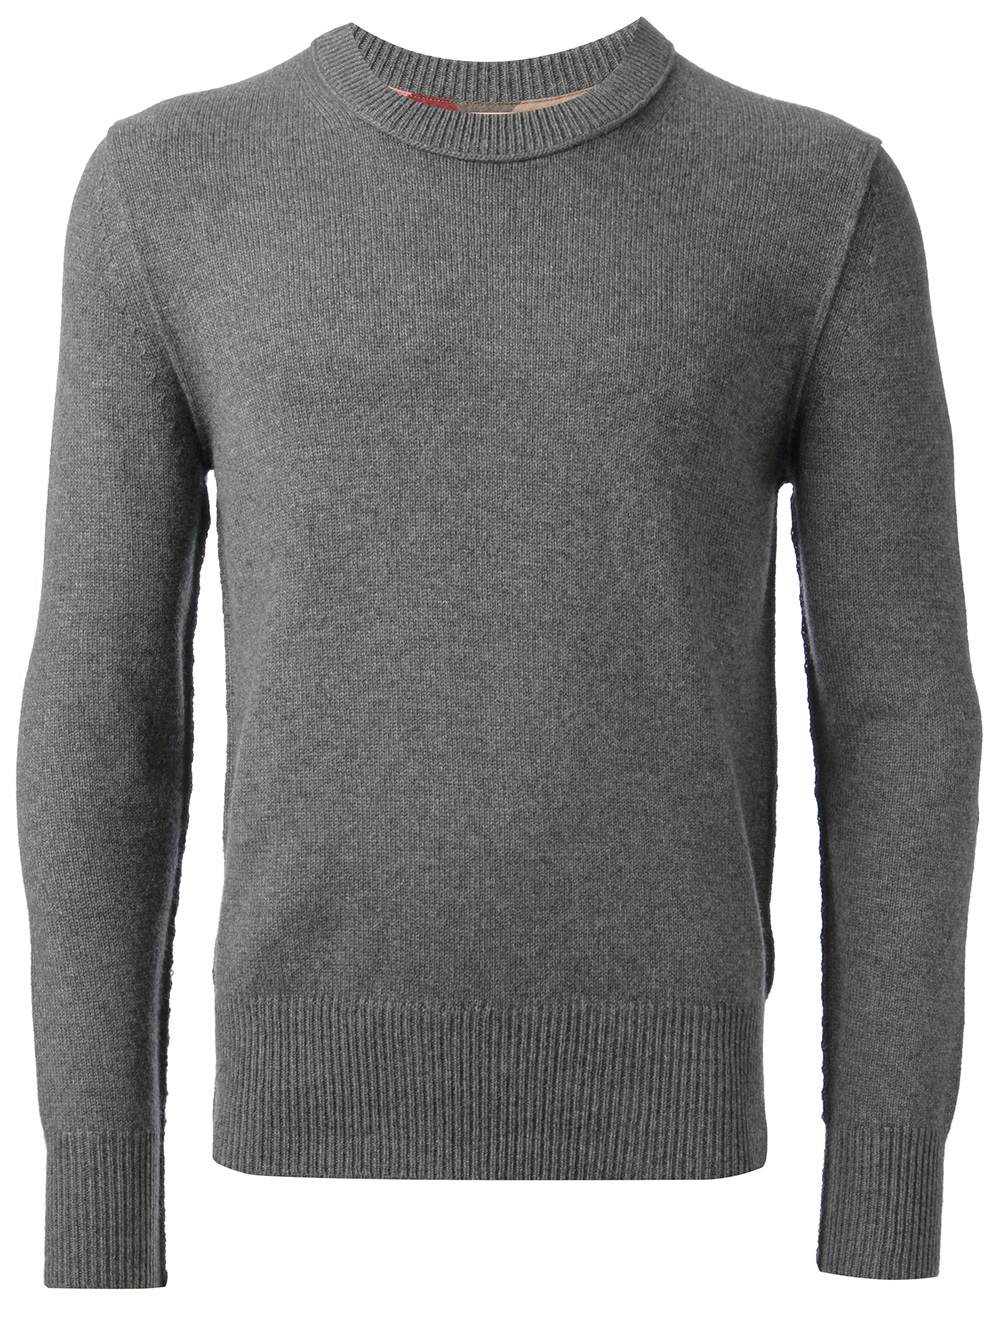 Burberry Brit Elbow Patch Sweater in Gray for Men (grey) | Lyst